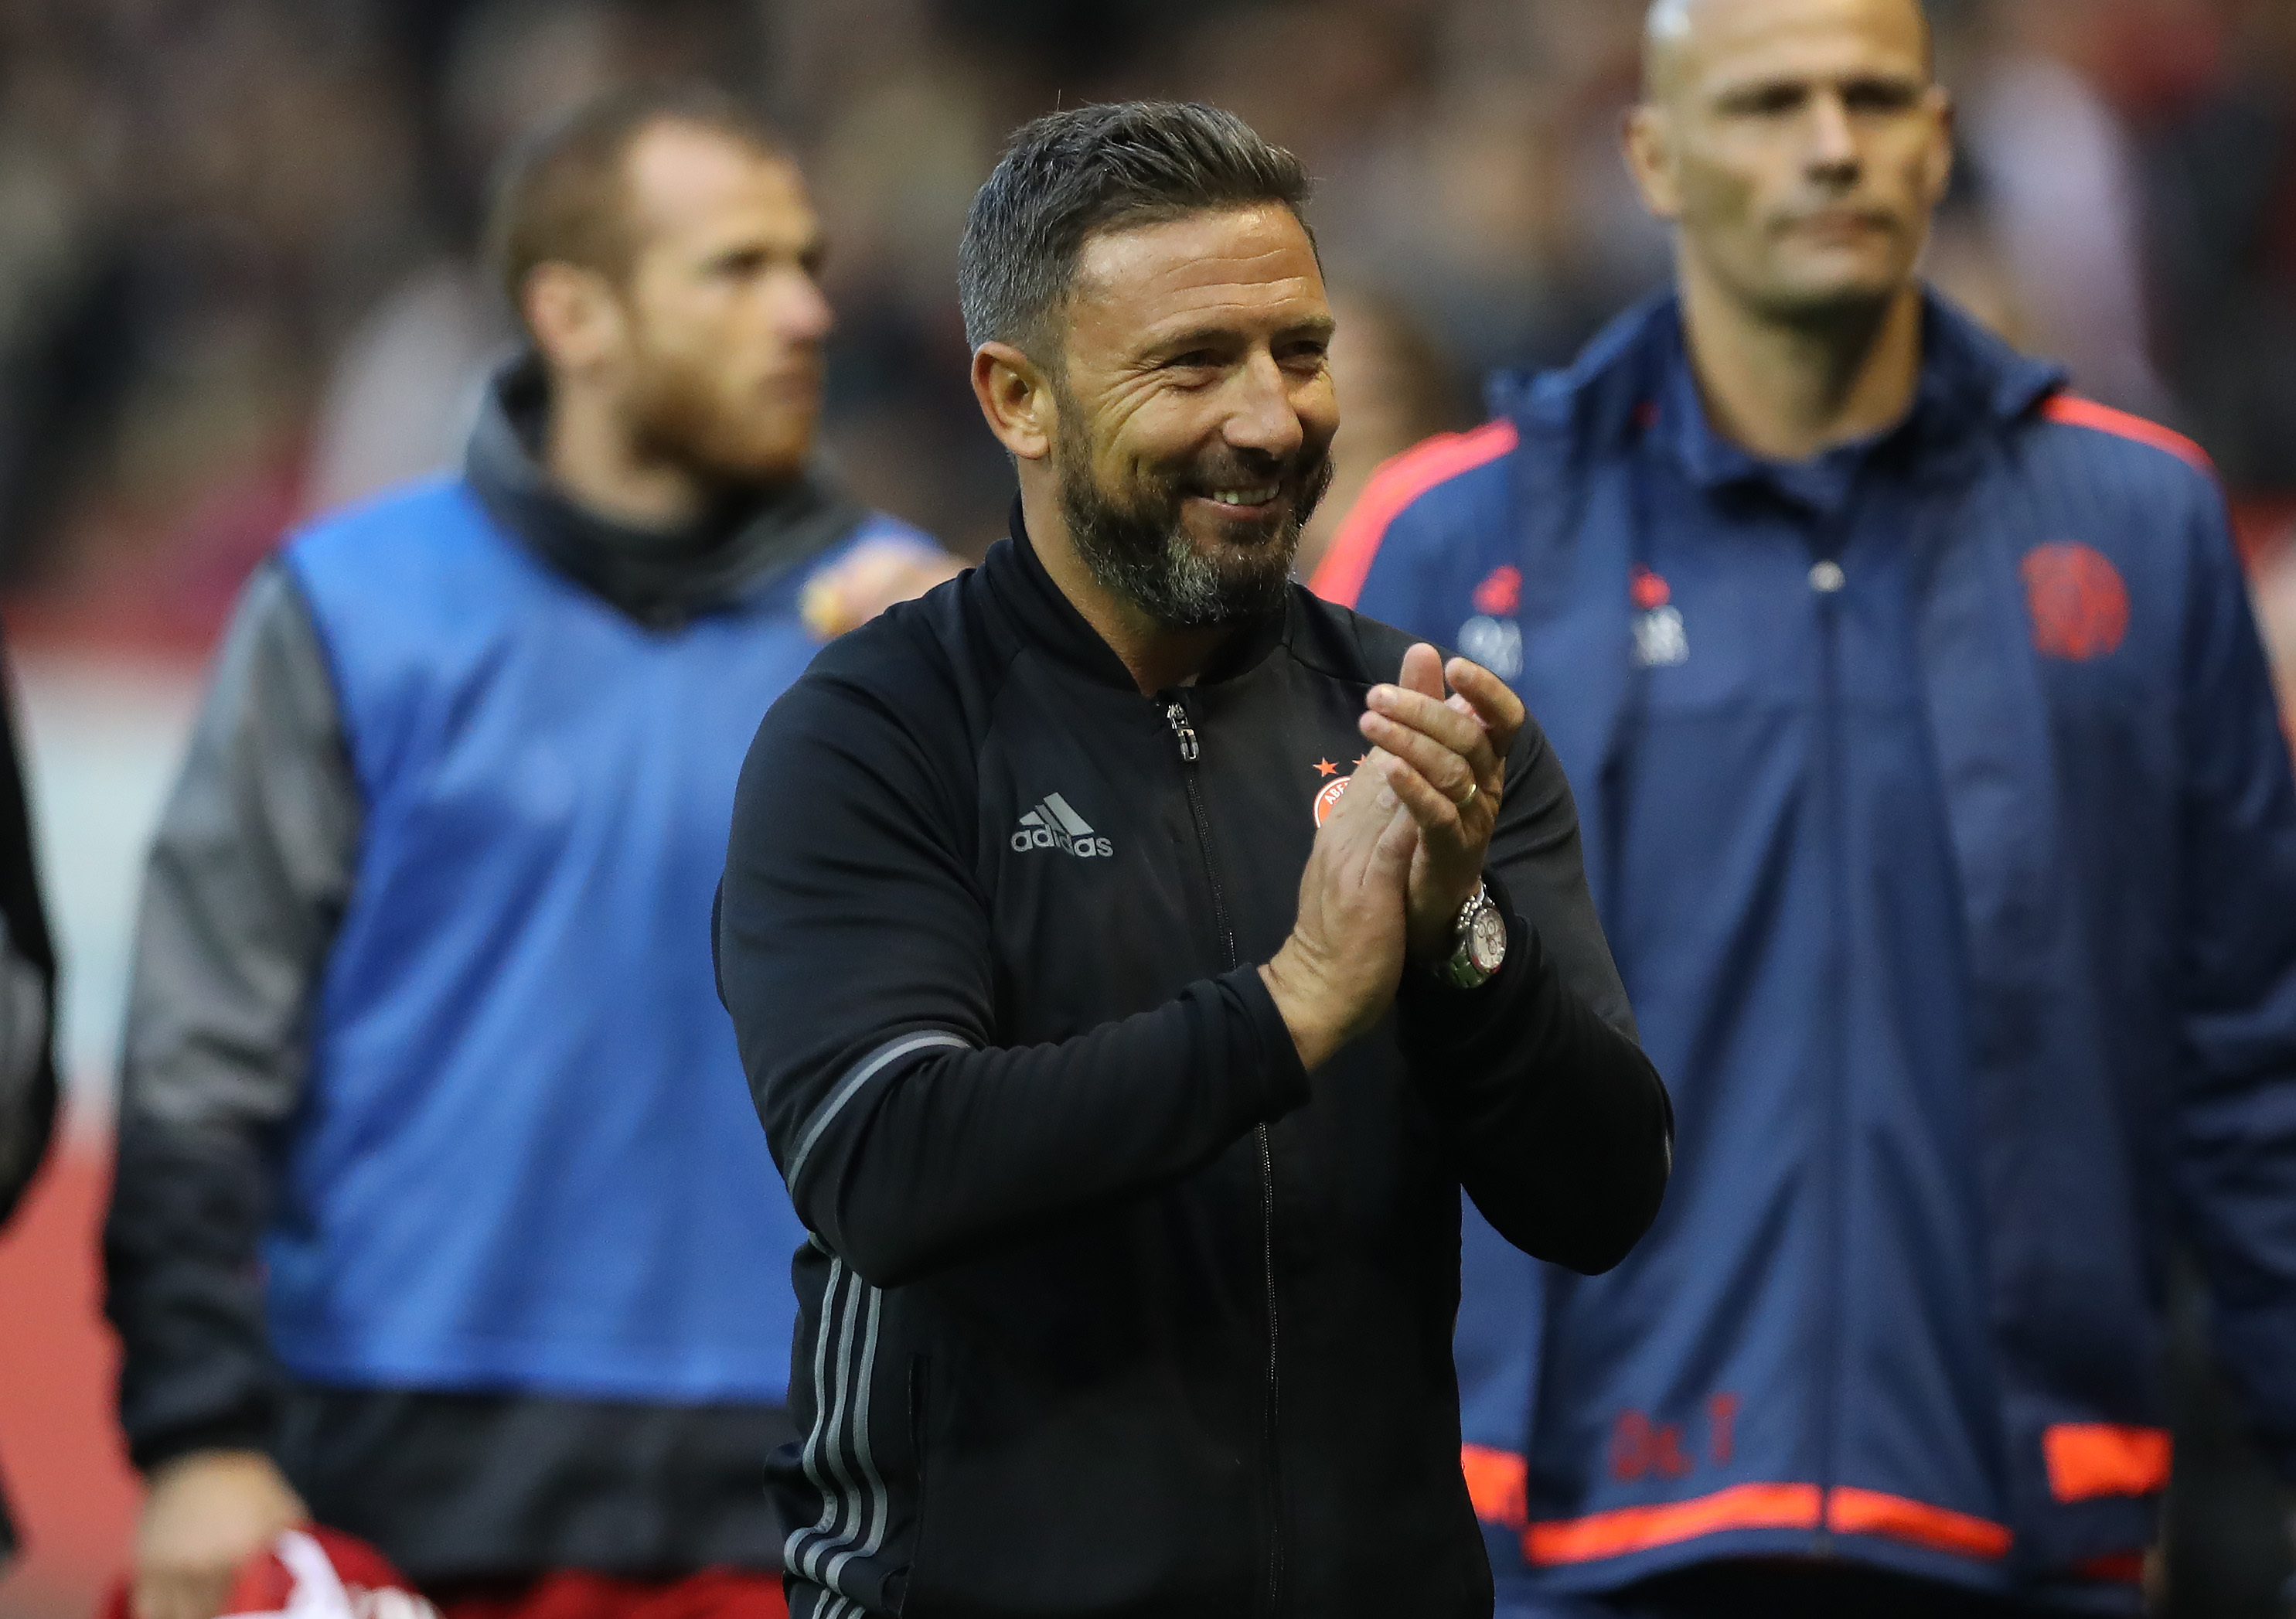 Aberdeen manager Derek McInnes celebrates at full time (Ian MacNicol/Getty Images)